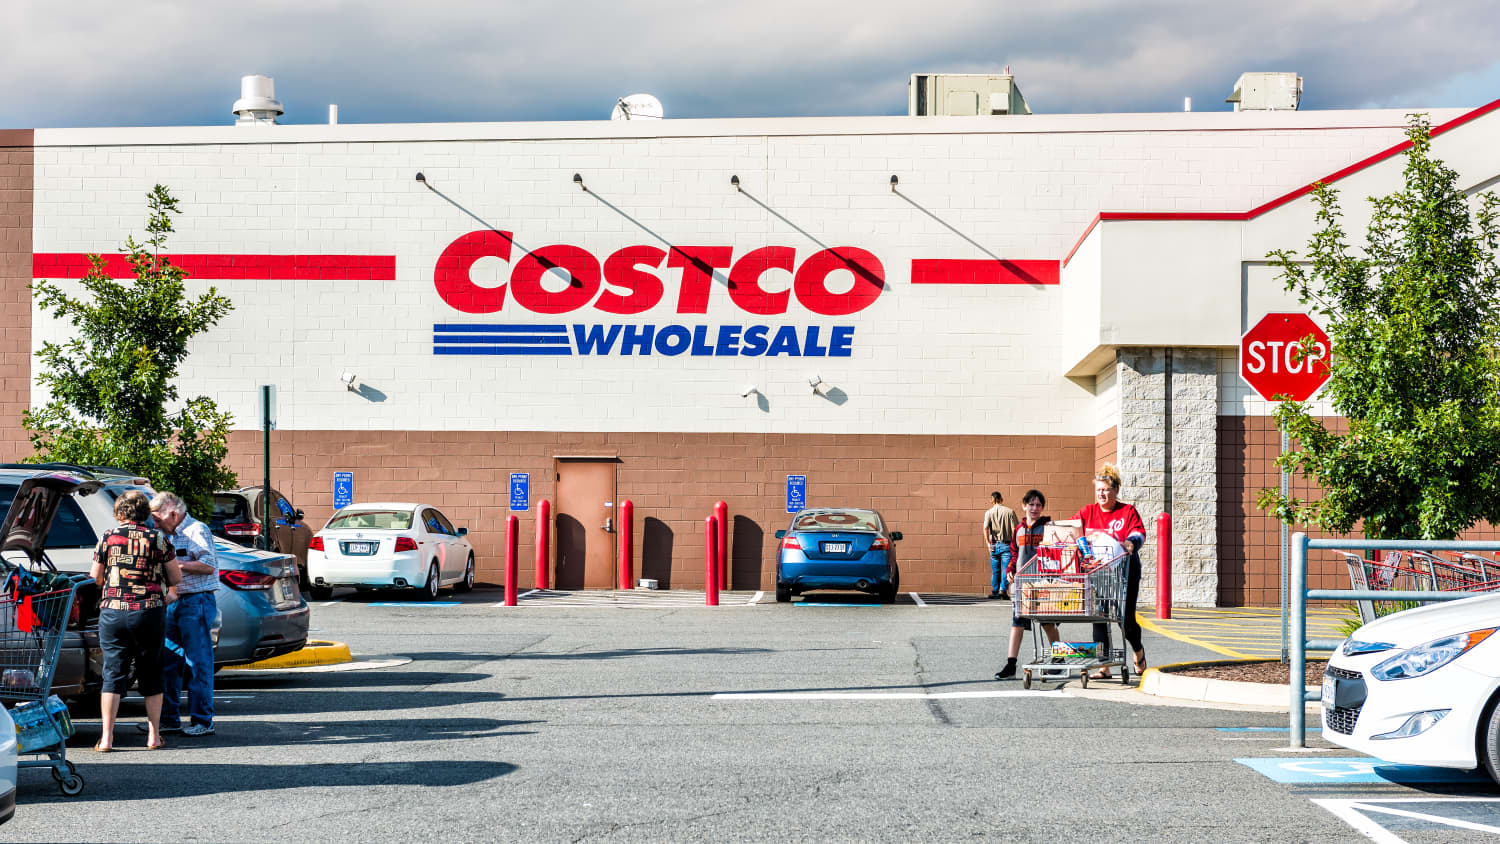 7 Luxury Goods That Are More Affordable at Costco